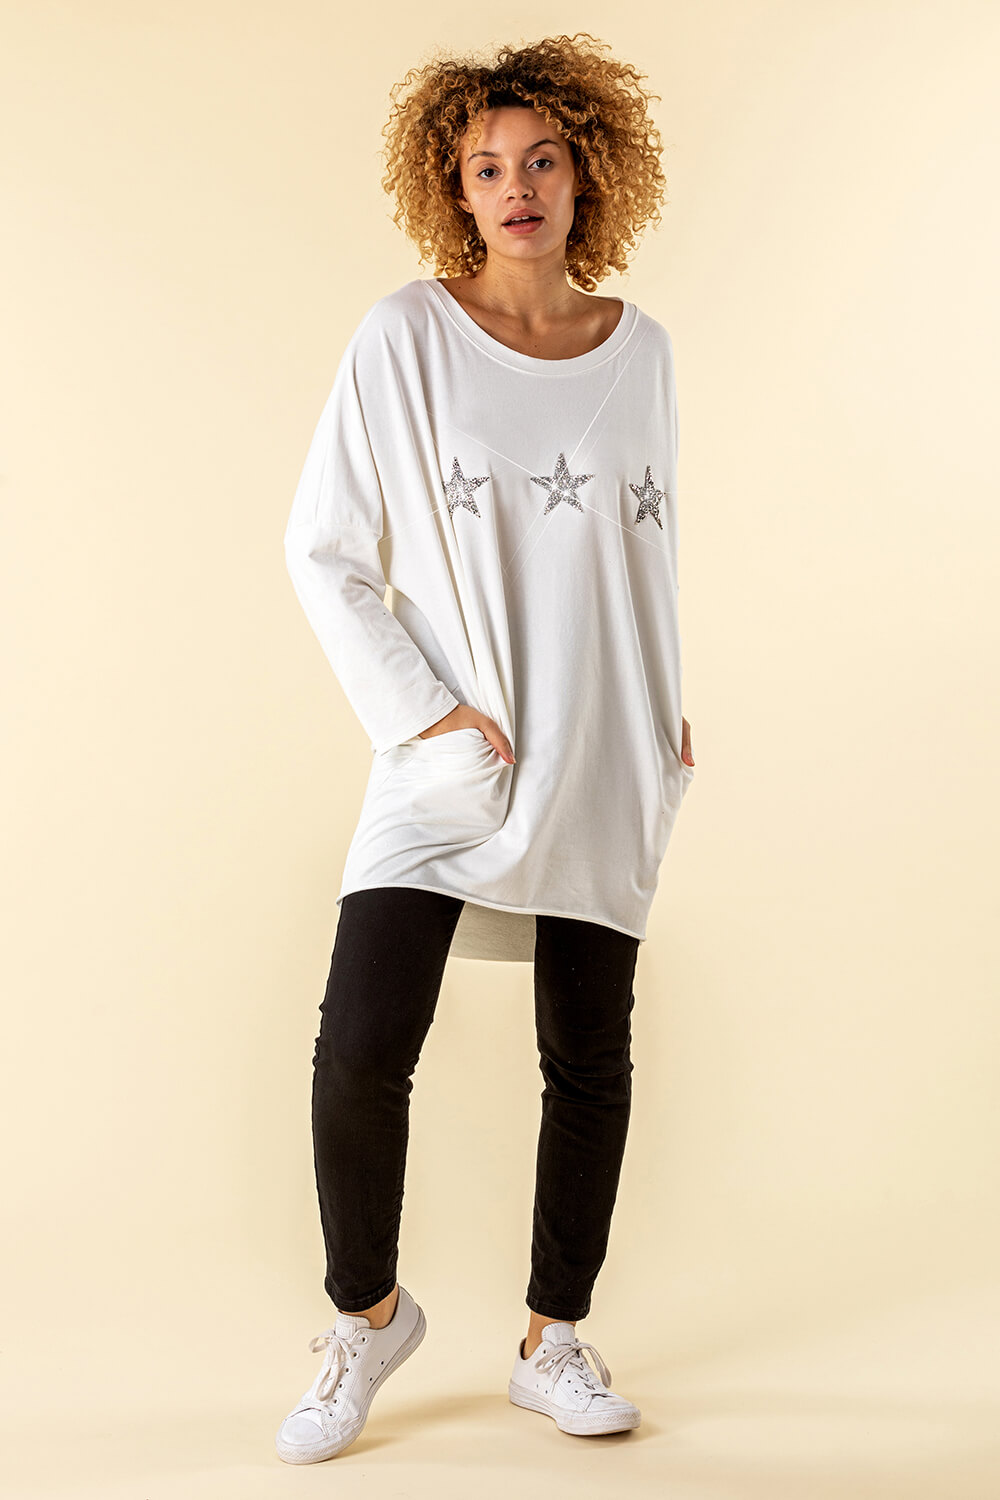 White One Size Long Sleeve Sequin Star Top, Image 2 of 4